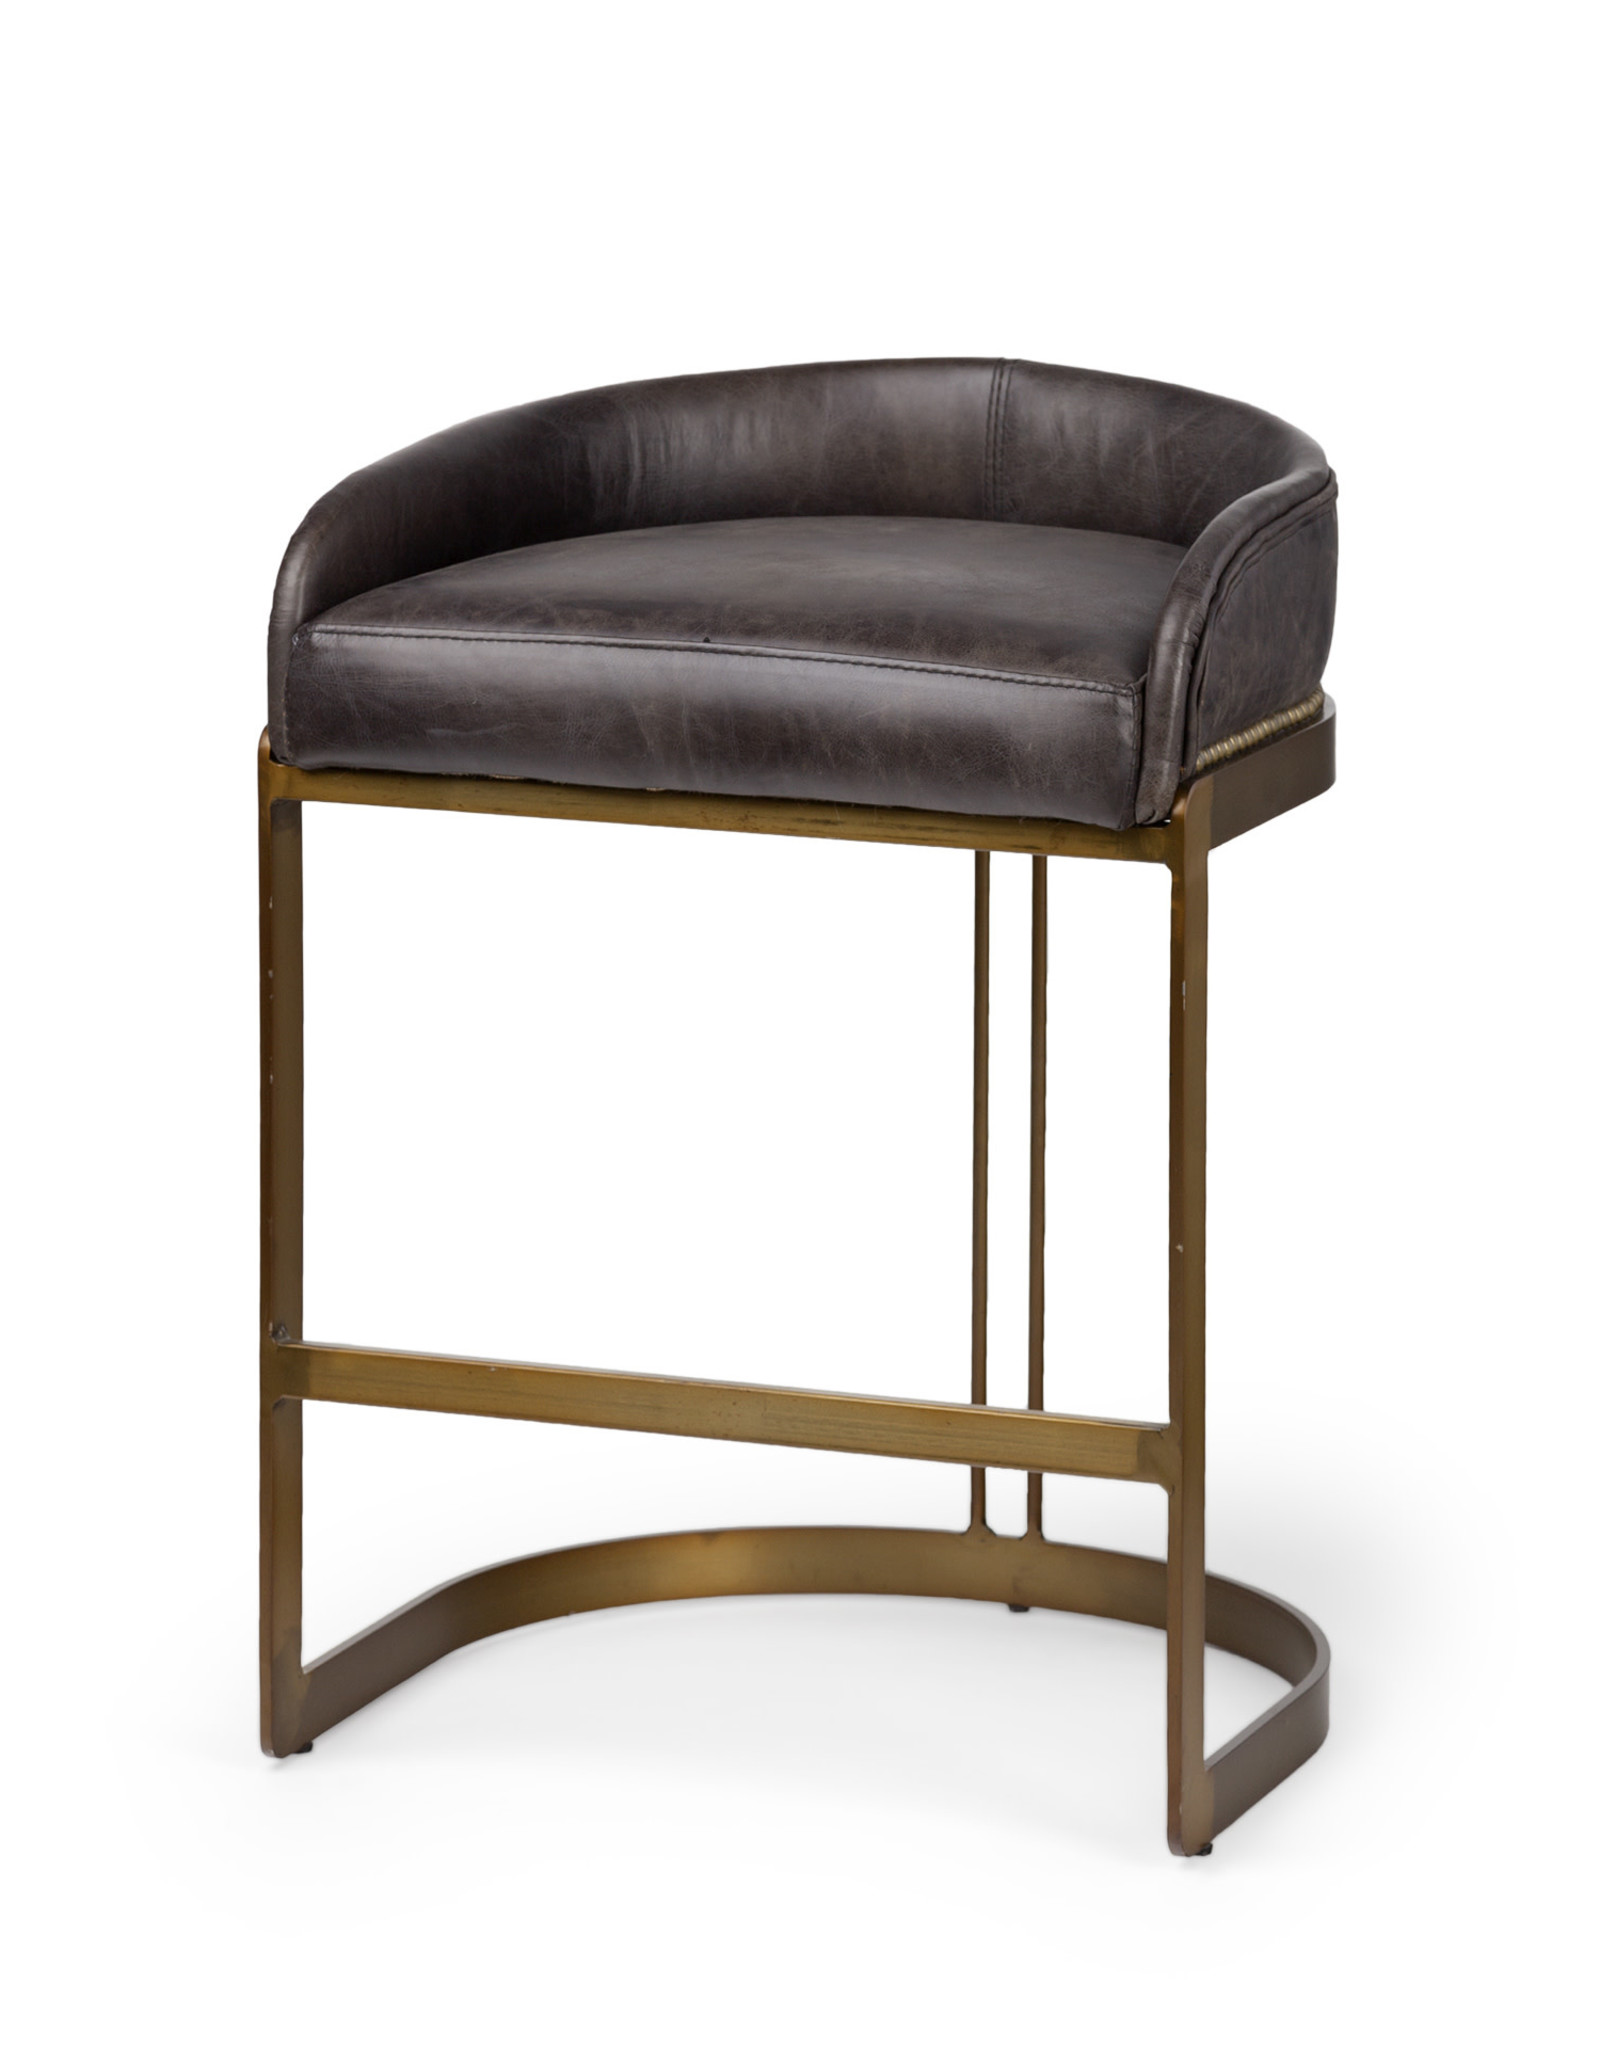 Hollyfield Black Leather & Gold Counter Stool